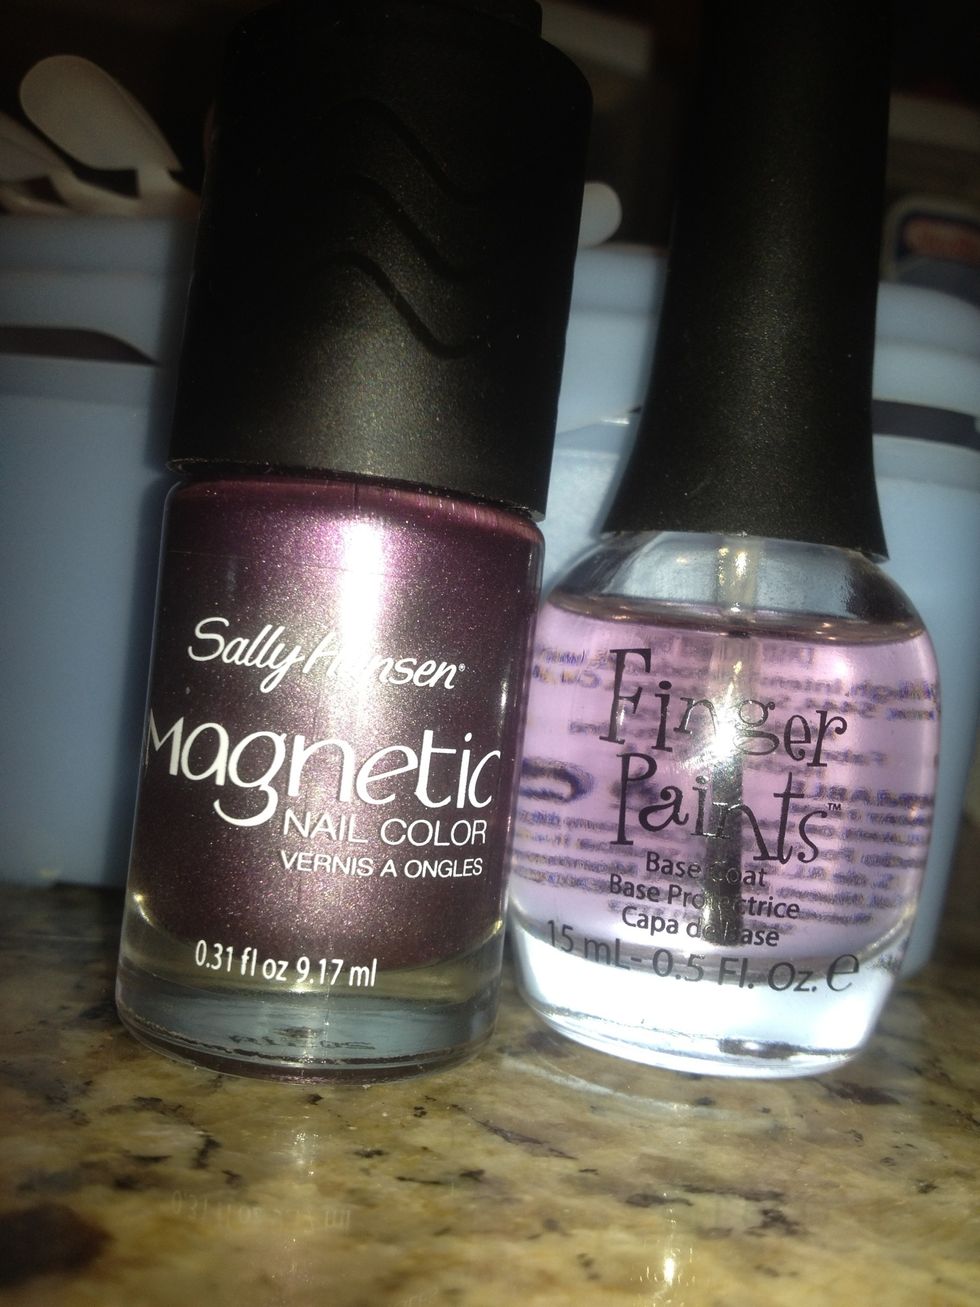 How to apply magnetic nail polish - B+C Guides